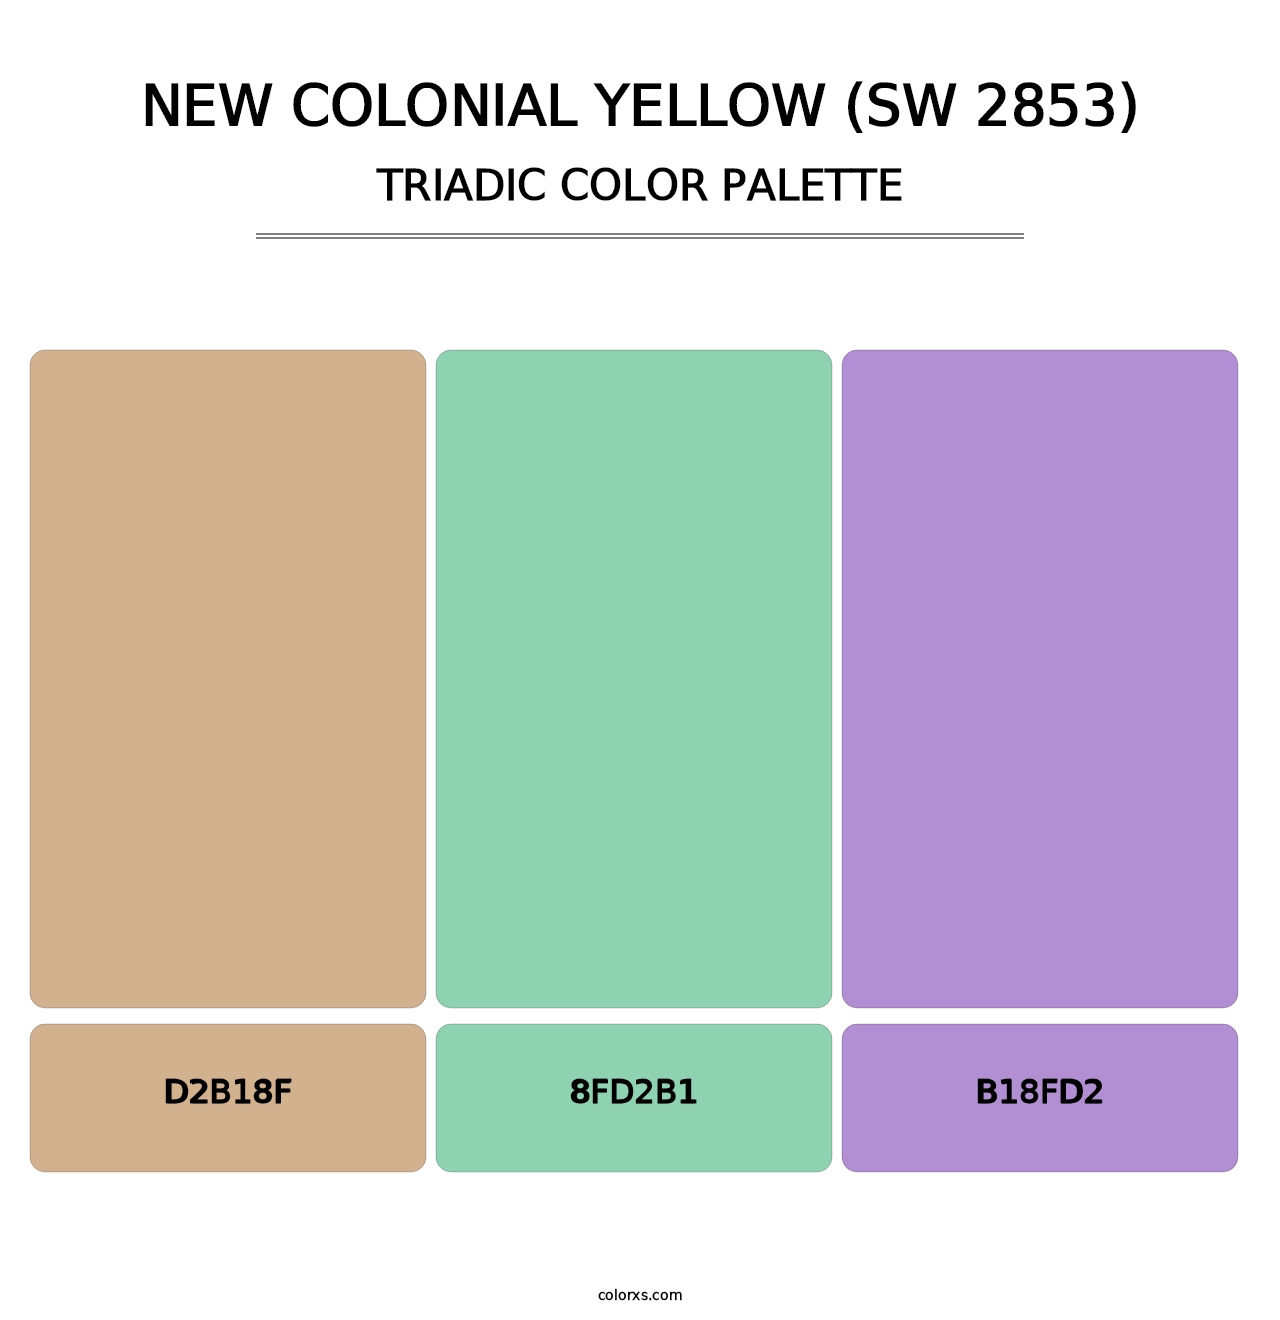 New Colonial Yellow (SW 2853) - Triadic Color Palette